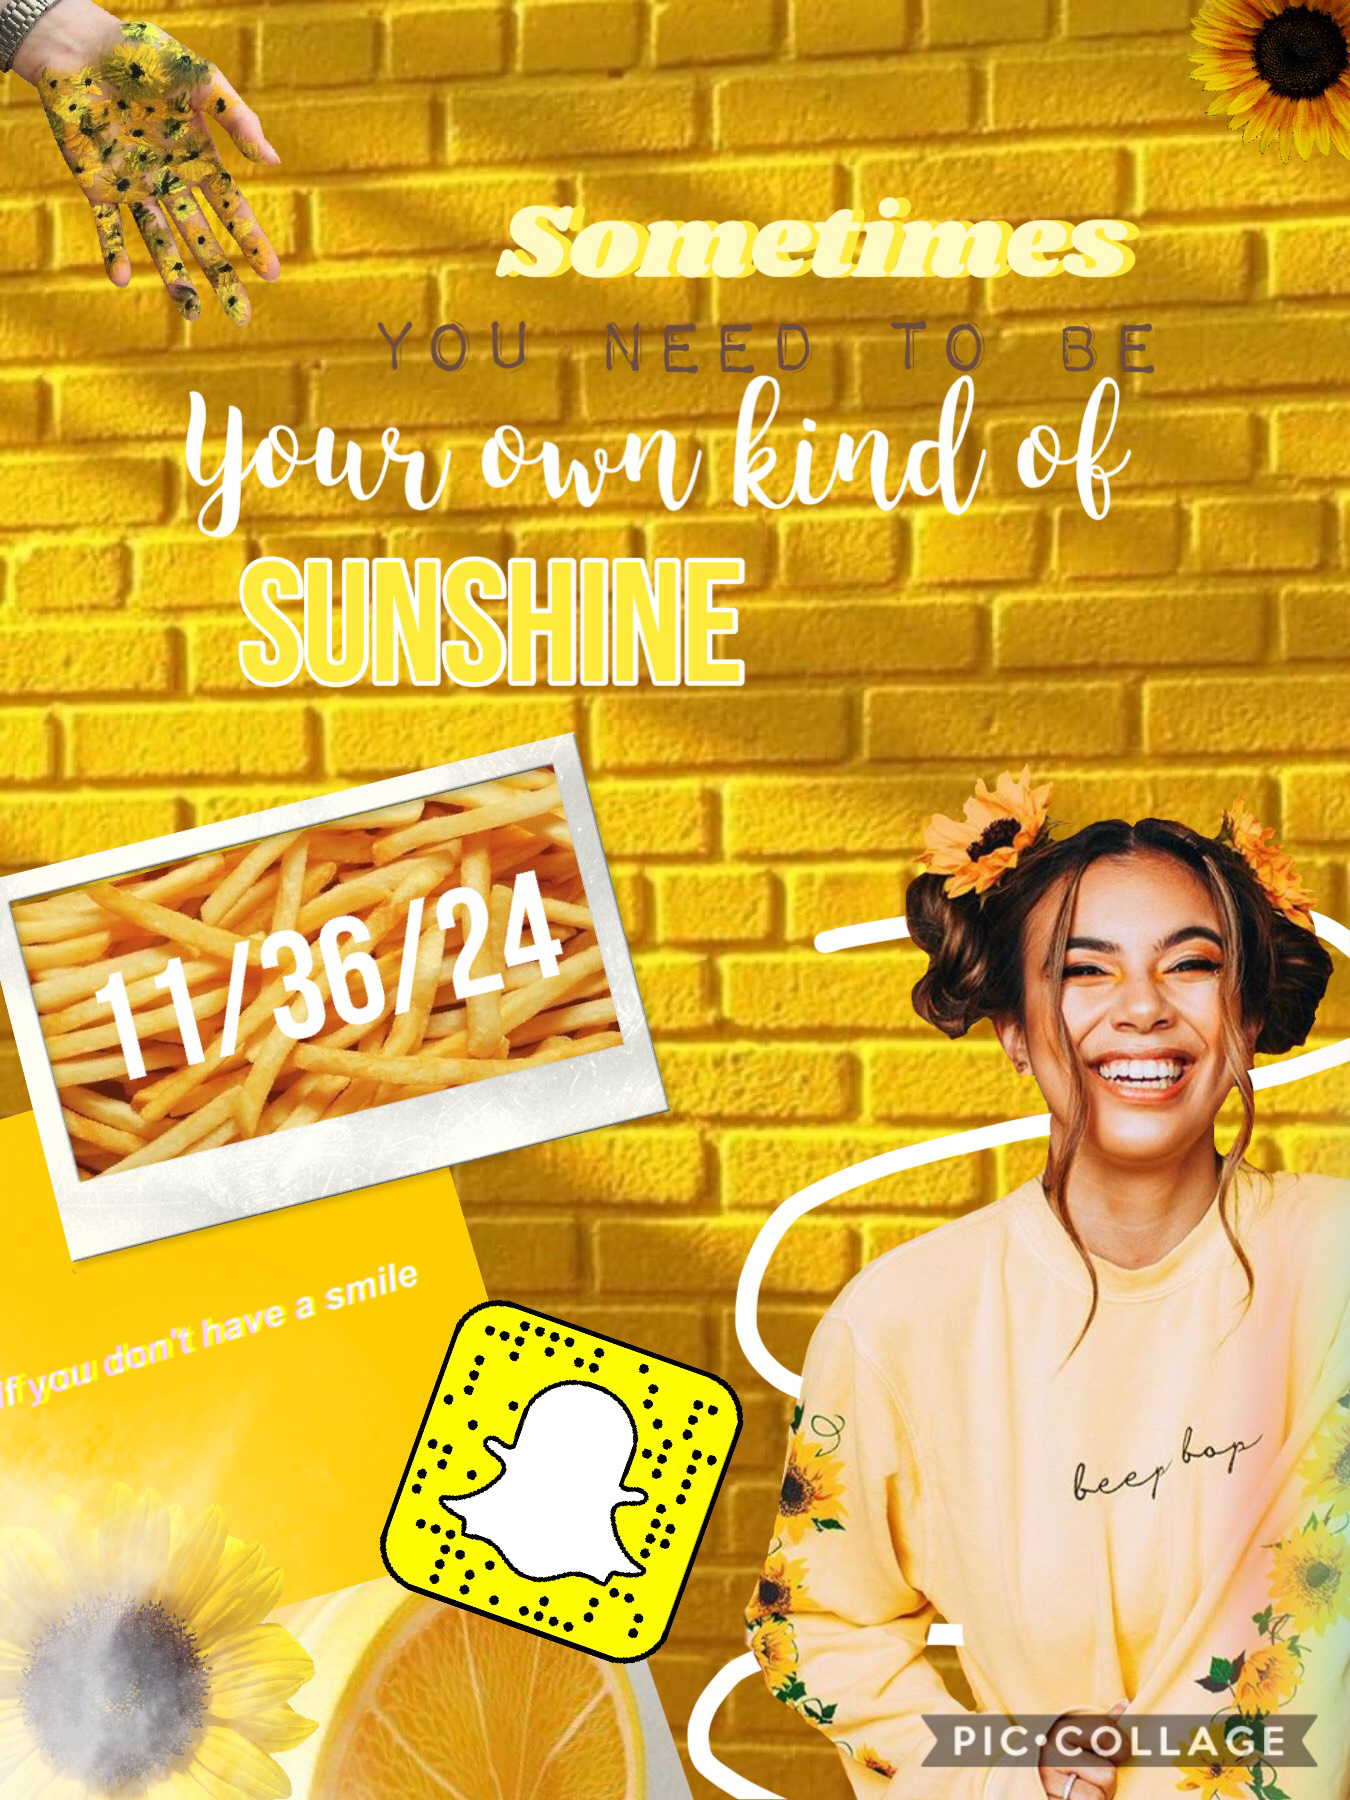                          💛tap💛
Remember to always be happy ☀️☀️
                   Love yourself 
            - simplevibes_edits_